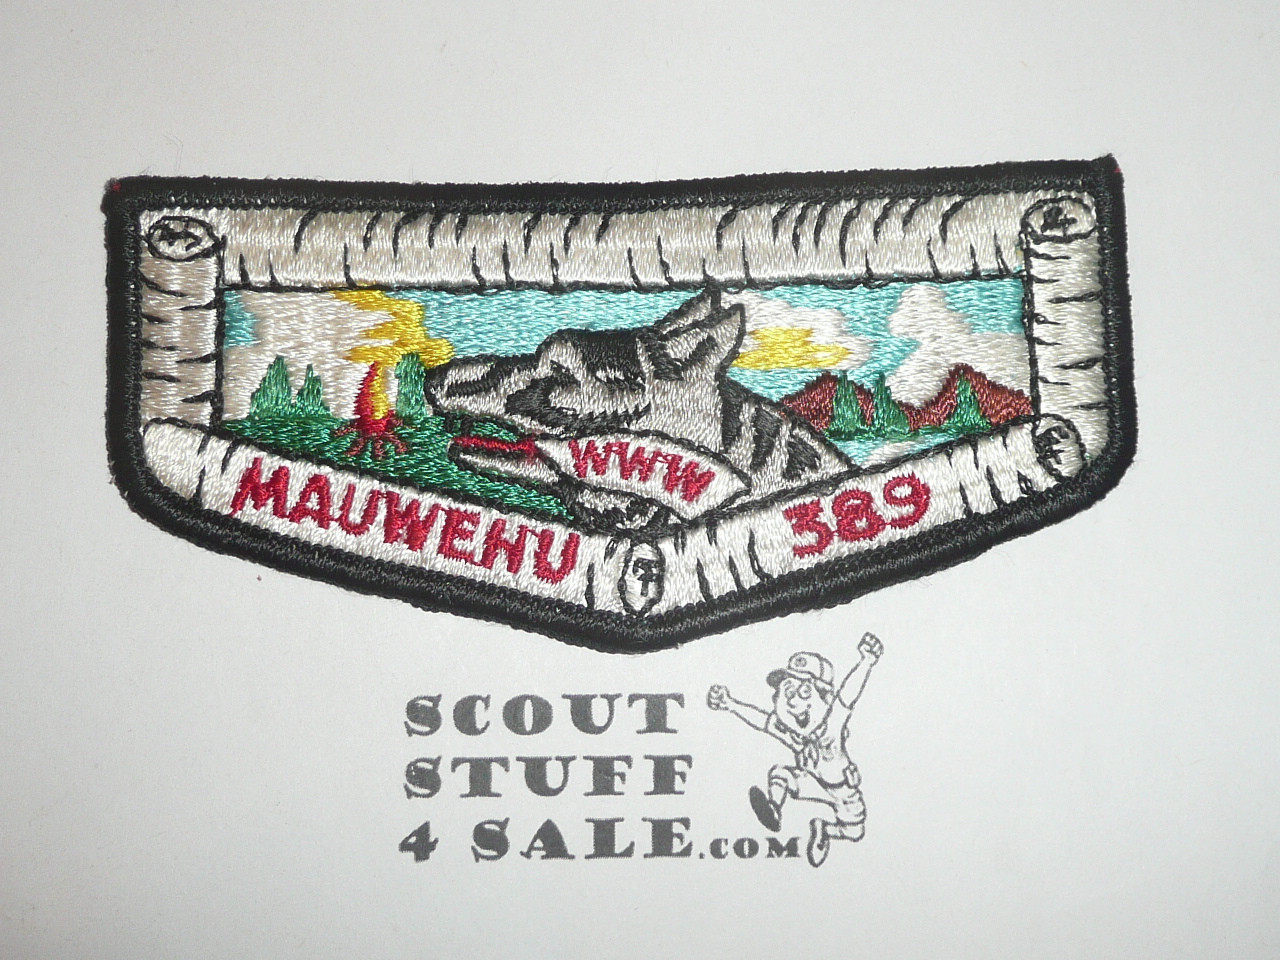 Order of the Arrow Lodge #389 Mauwehu s2 Flap Patch